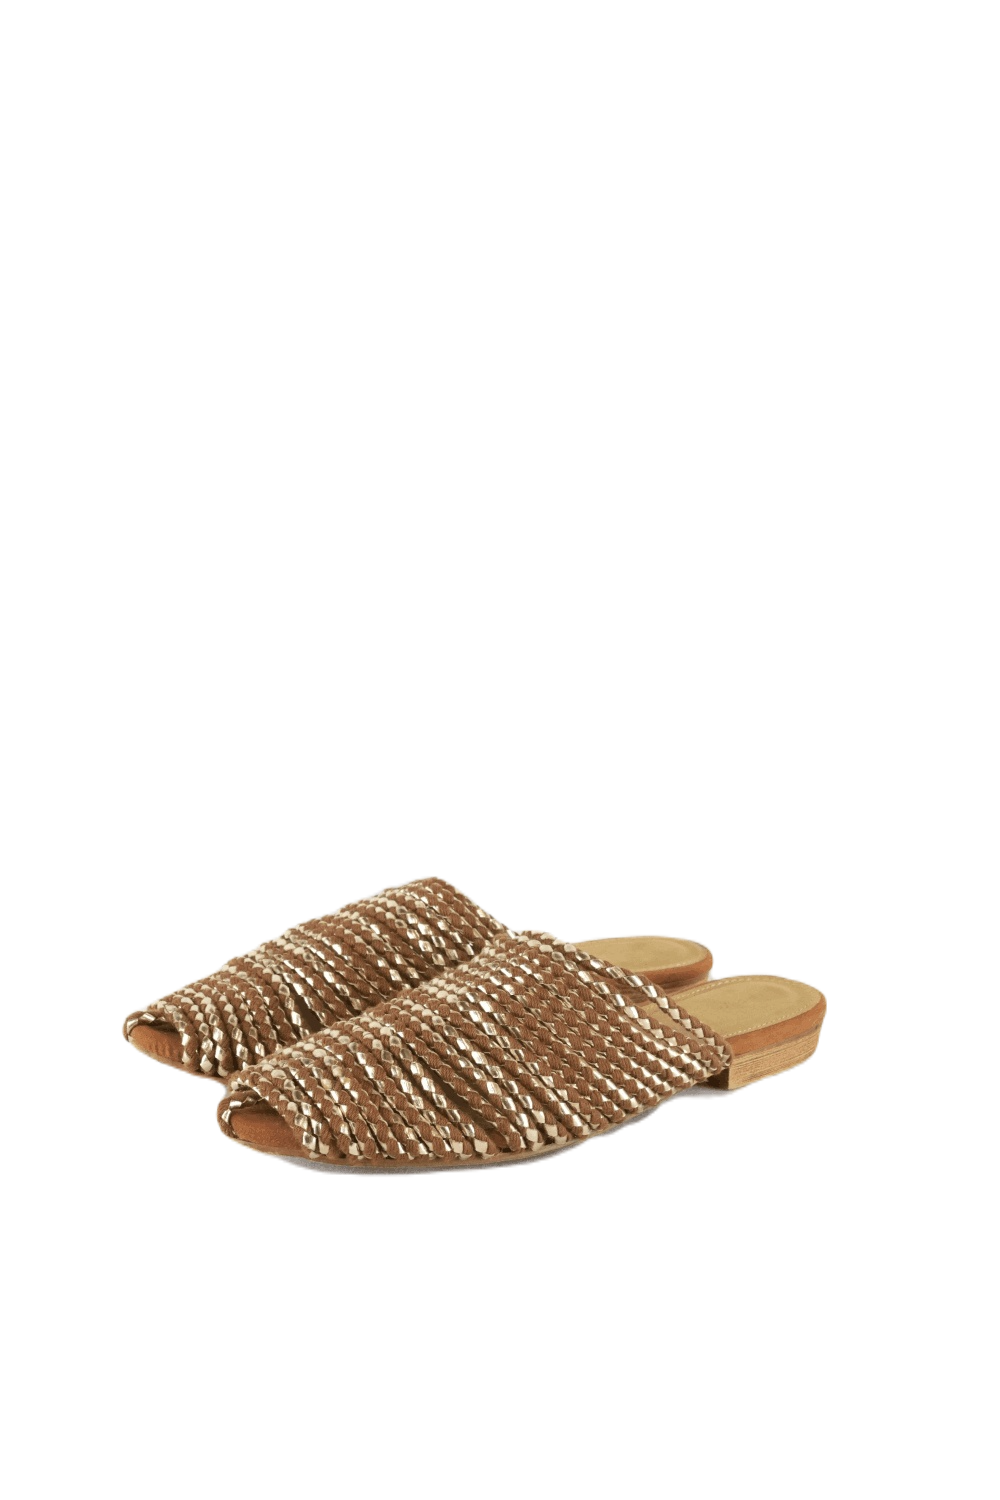 nmeise Brown And Silver Slip ons 39